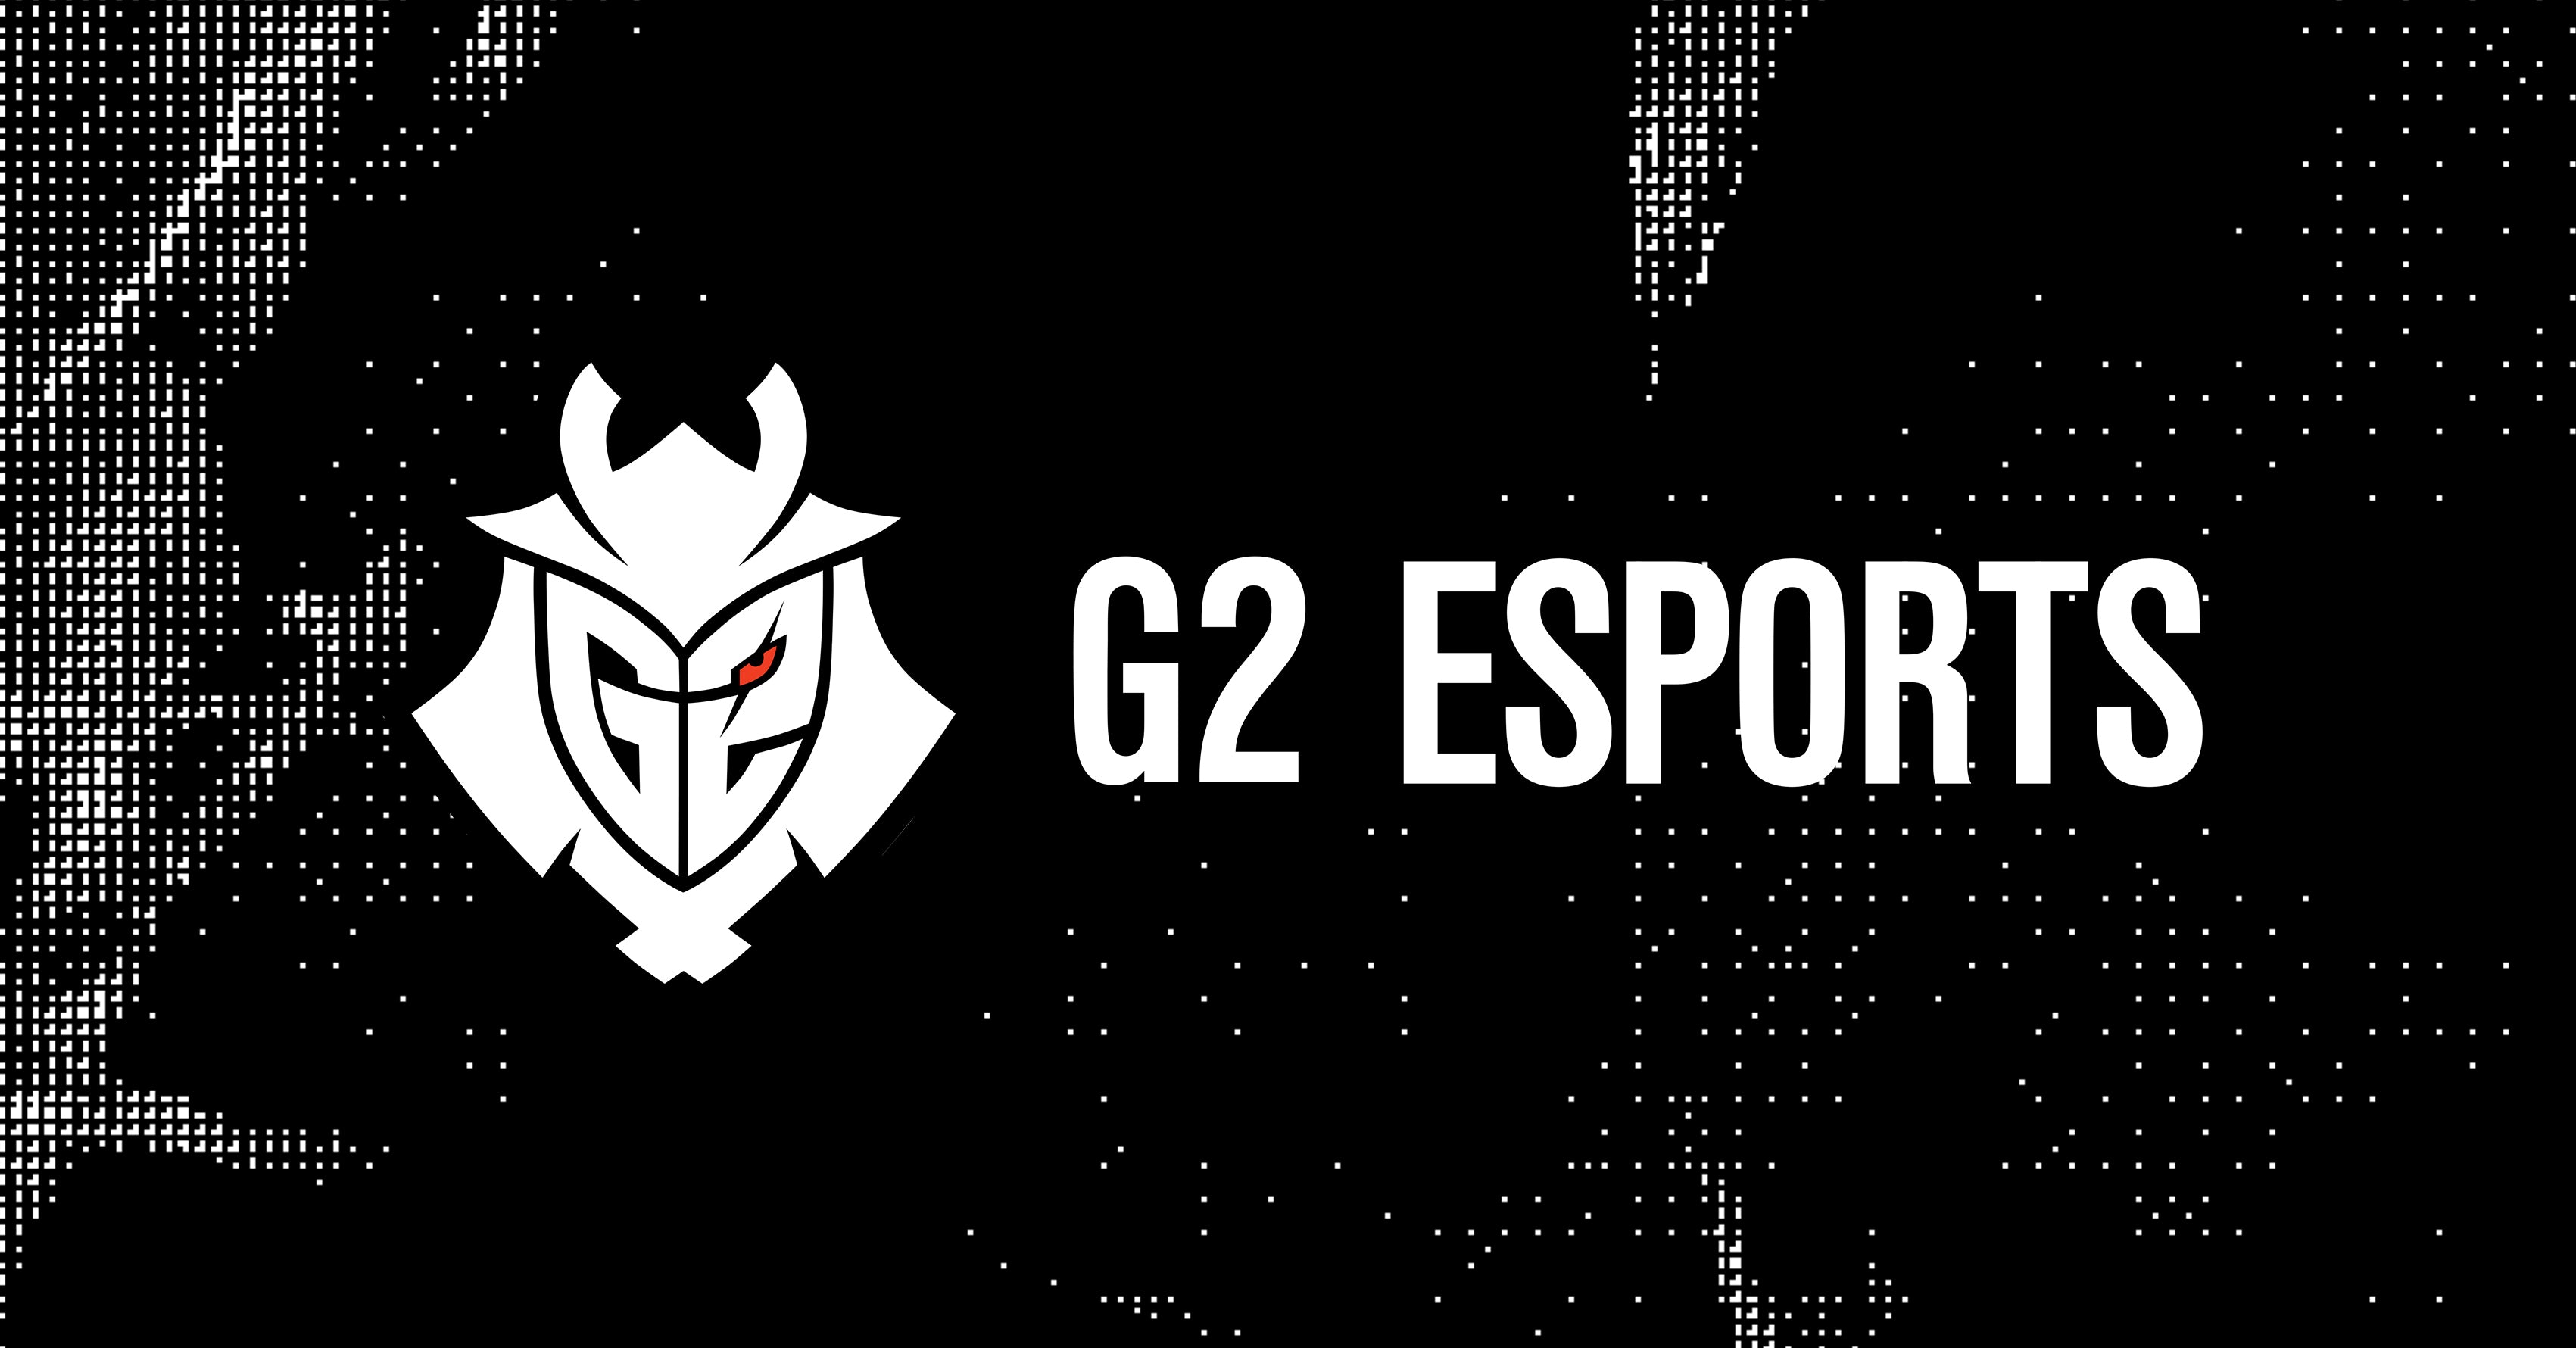 G2 Esports The most entertaining esports organization in the world